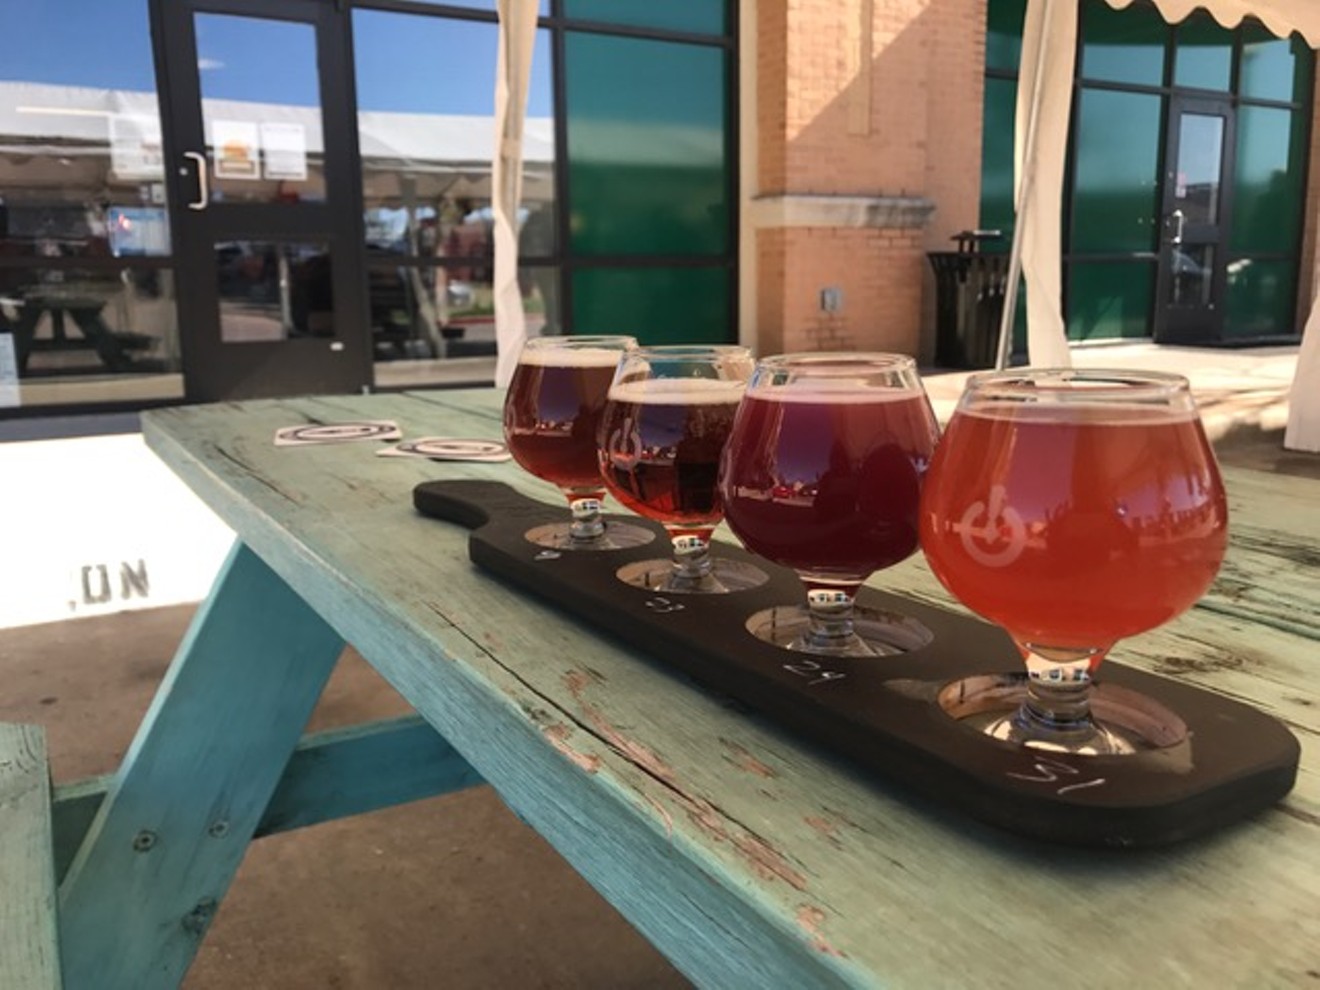 Arlington beer fans can fill their growlers and sip flights at the new On Tap, now open.